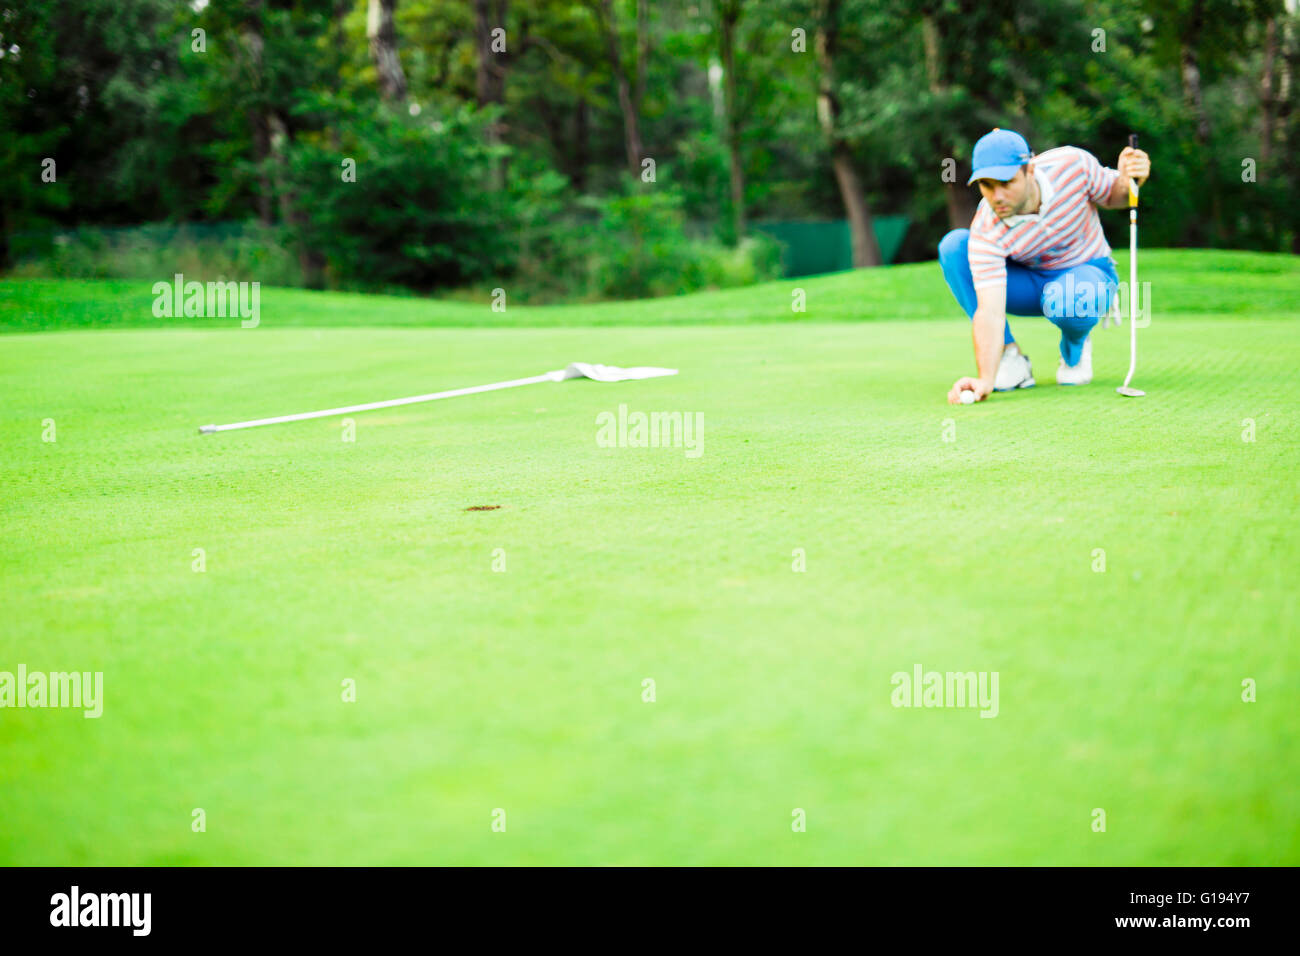 Golf player marking ball on the putting green before lifting the ball Stock Photo